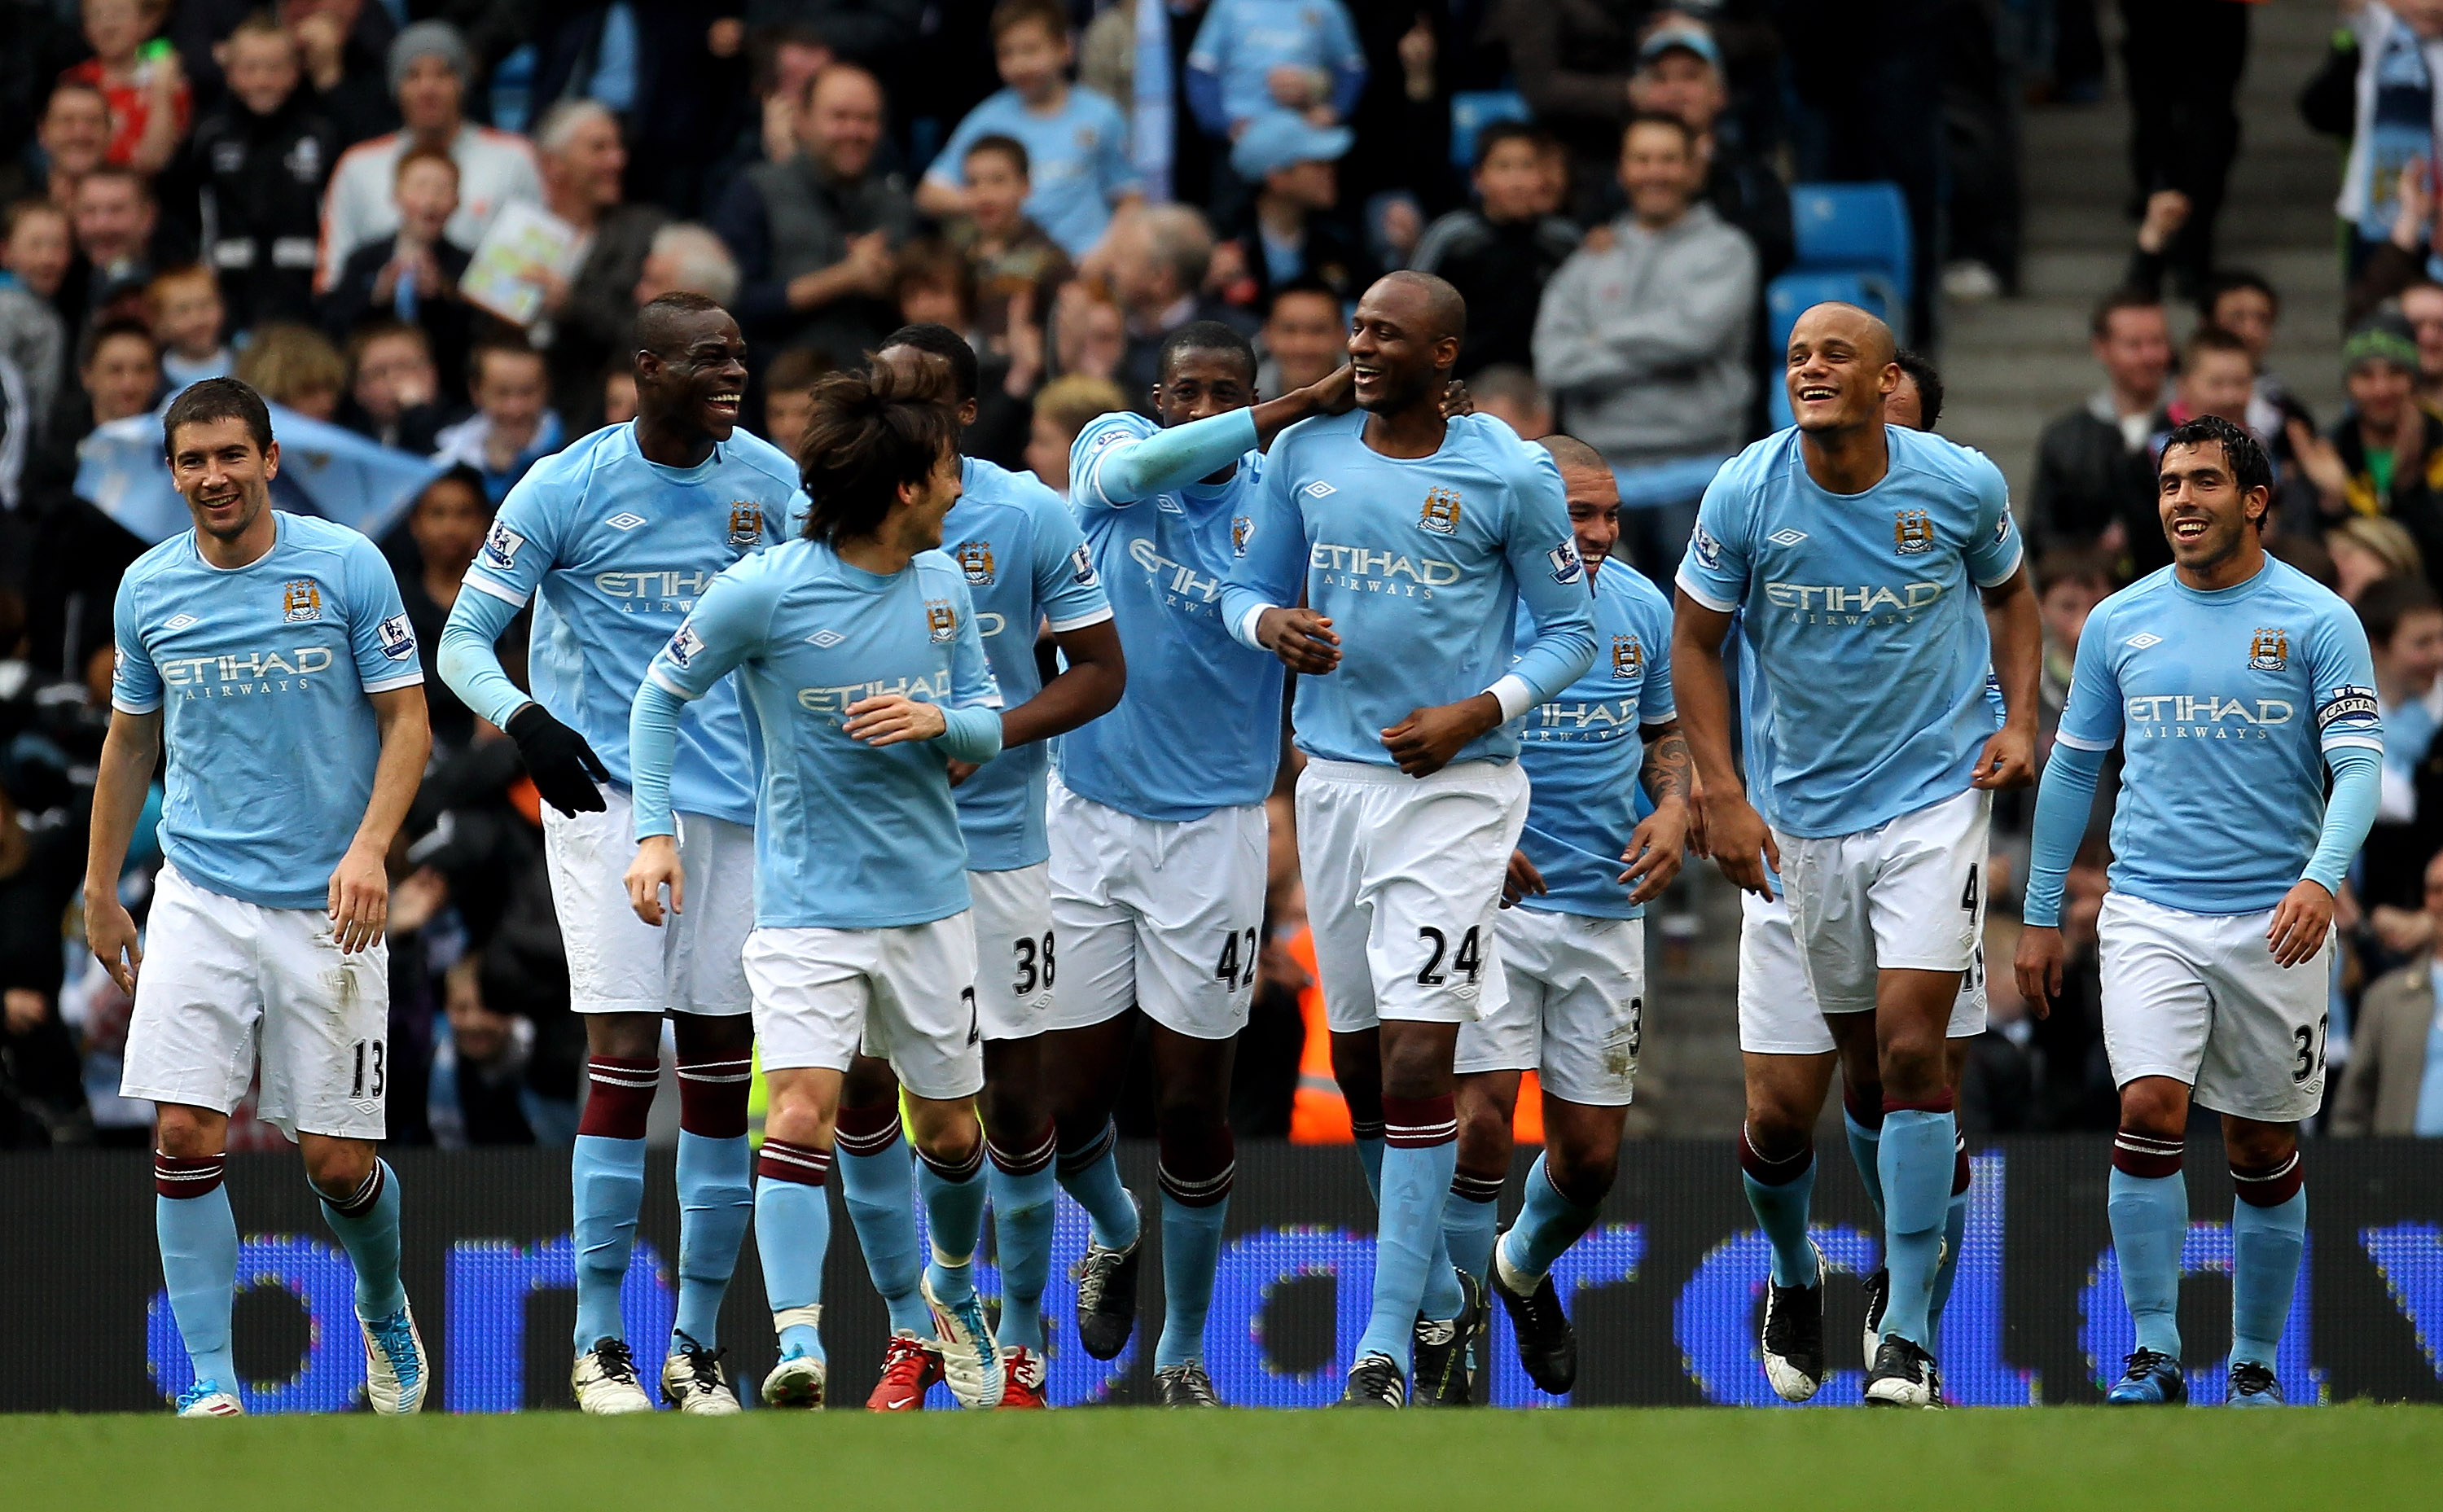 MANCHESTER, ENGLAND - APRIL 03:  Patrick Viera of Manchester City is congratulated by his team mates after scoring his team's fourth goal during the Barclays Premier League match between Manchester City and Sunderland at the City of Manchester Stadium on